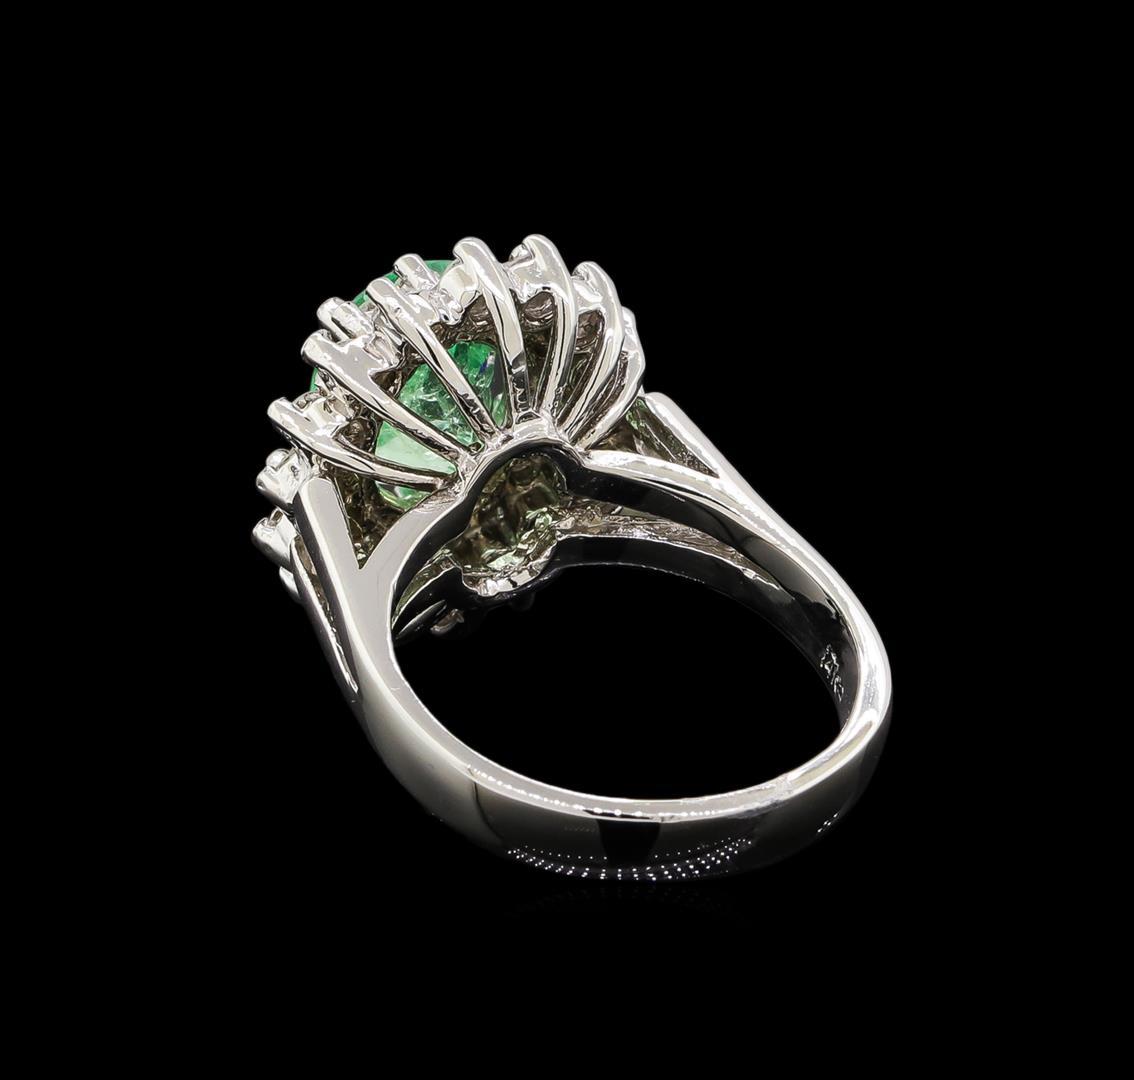 2.26 ctw Emerald and Diamond Ring - 14KT White Gold